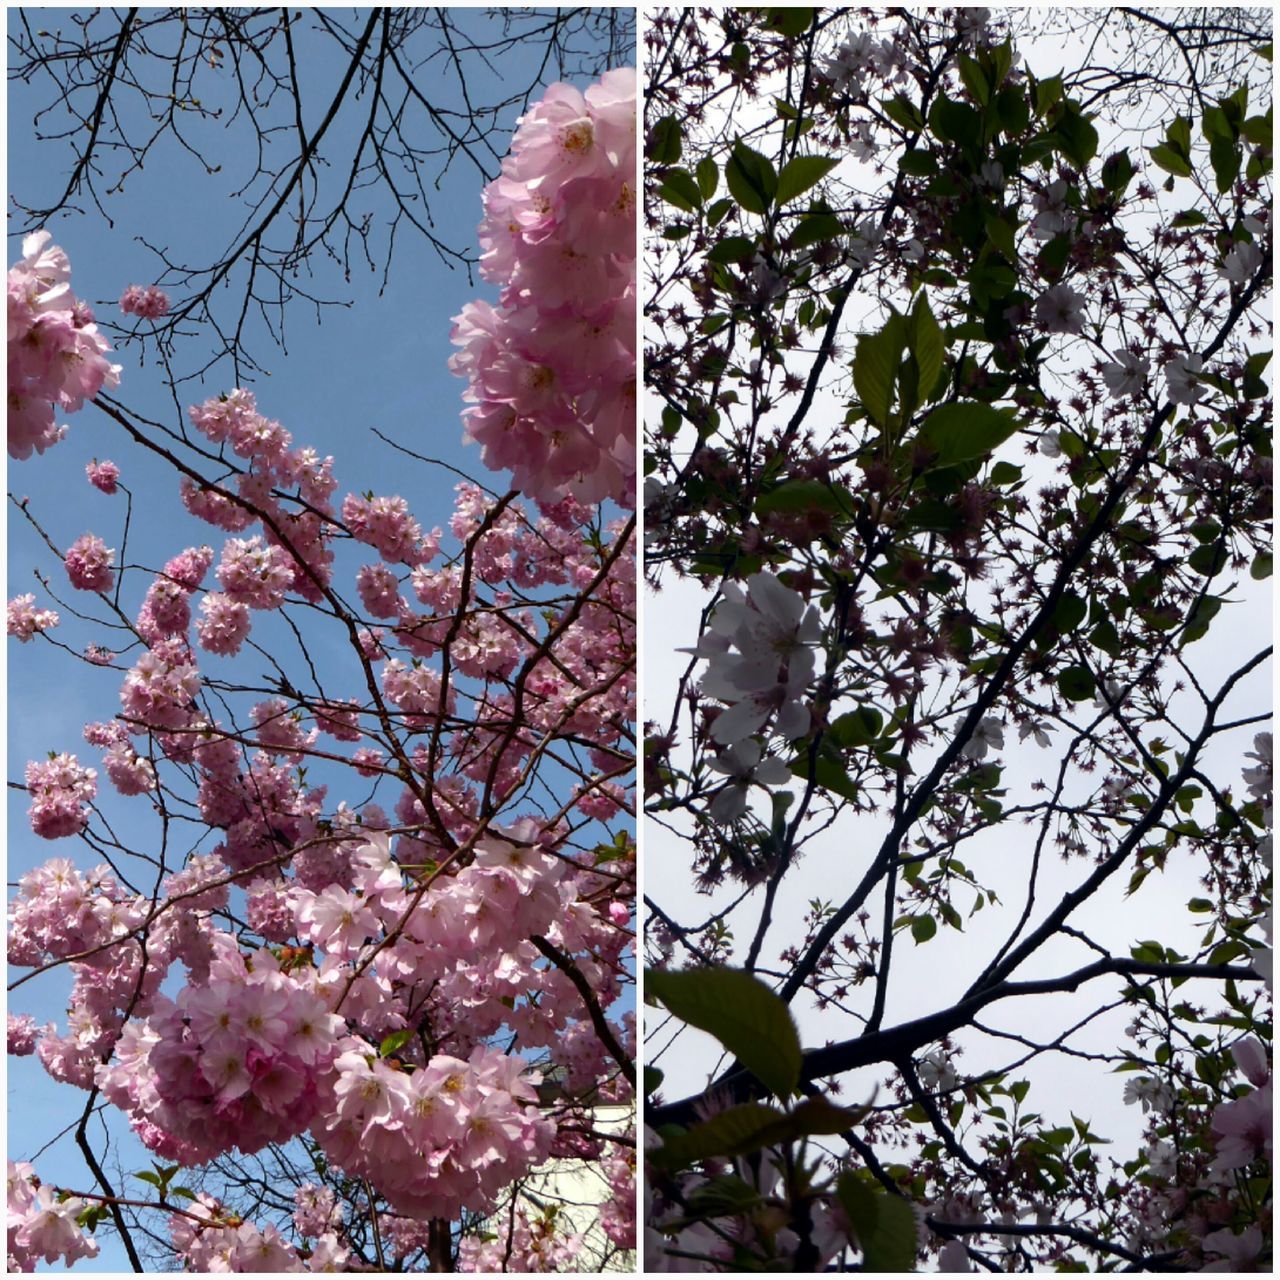 LOW ANGLE VIEW OF TREE WITH PINK BLOSSOM